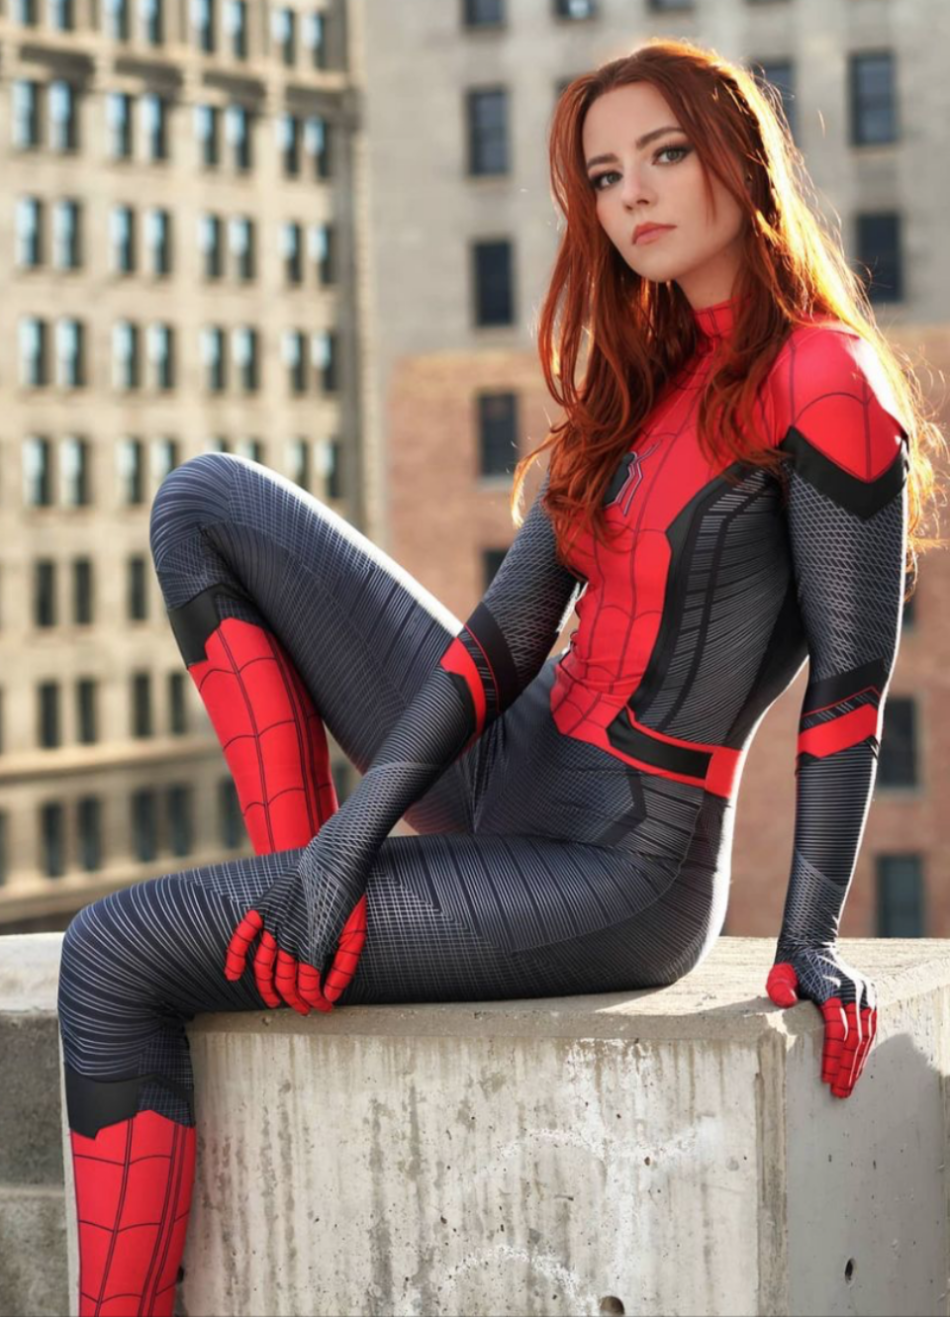 Sexy Red Hot Cosplay Girls Spiderman Women Best Photo Compilation 2021 (89 HQ Photos) 31